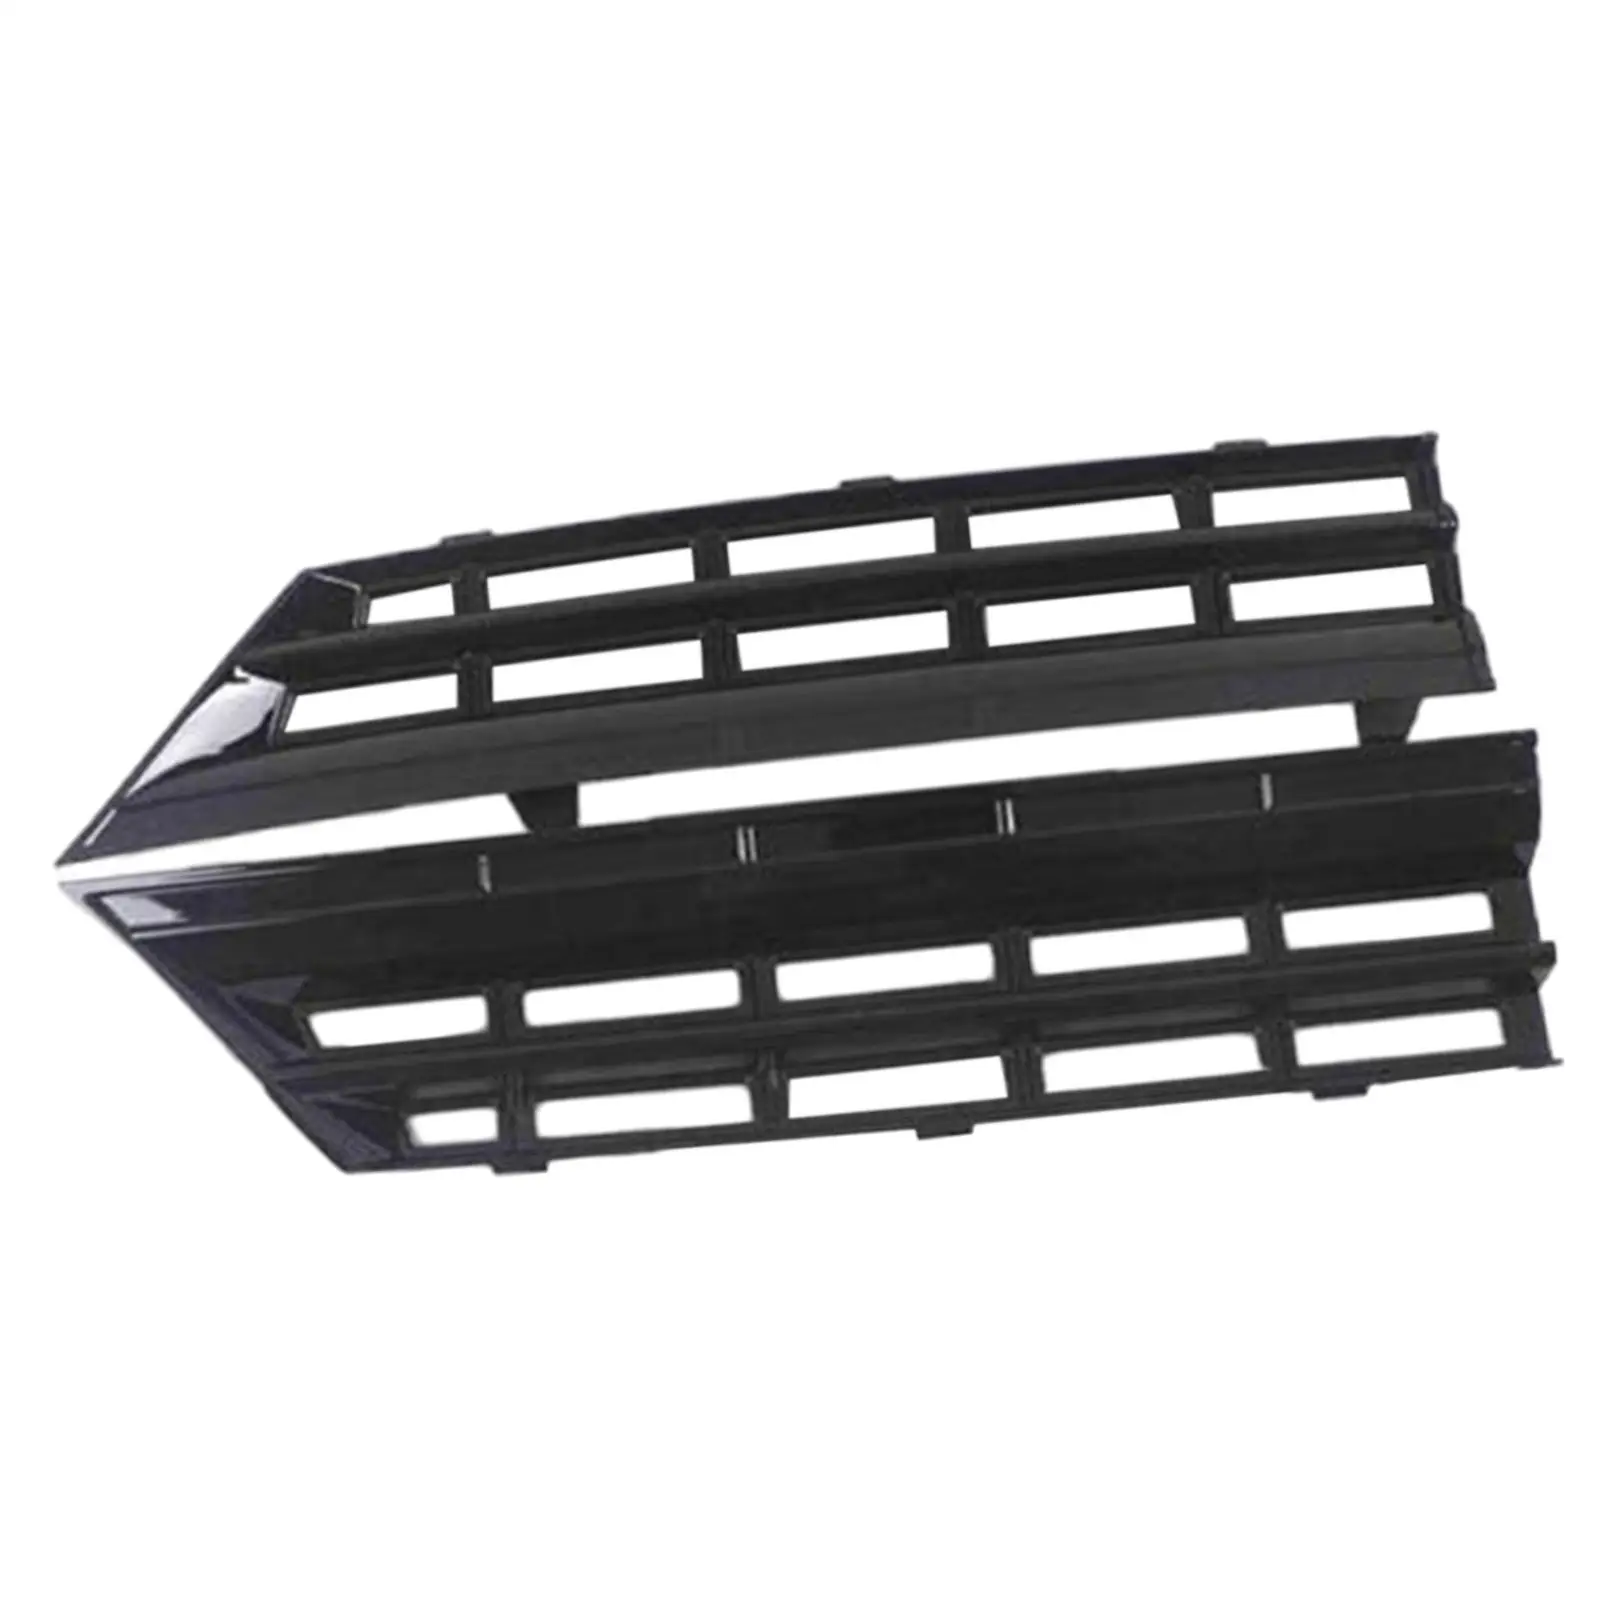 Front Grille Insert Mesh Air Inlet Vent Grille Cover Directly Replace Durable Easy Installation for Byd Dolphin Accessory